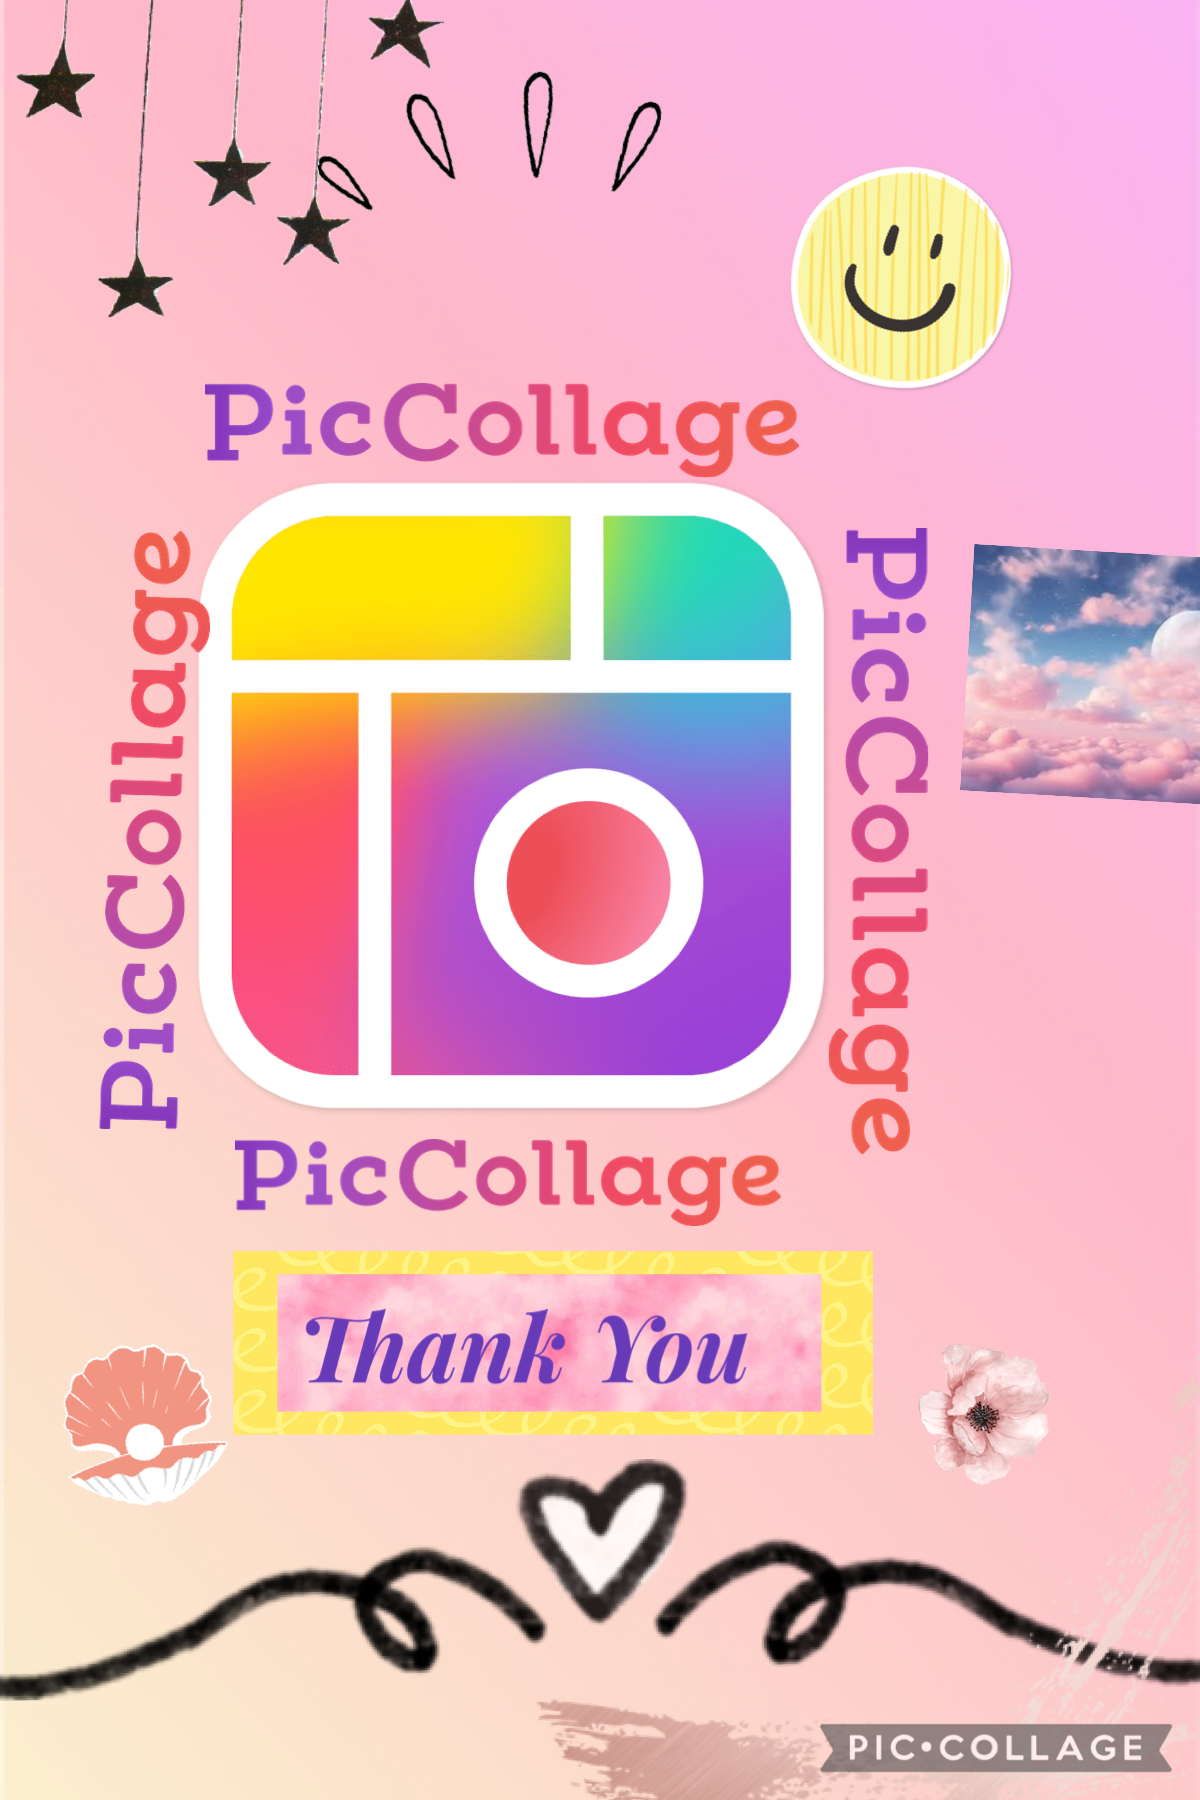 A big thanks to PicCollage for my social art media to come true! If you haven’t already, follow their accounts